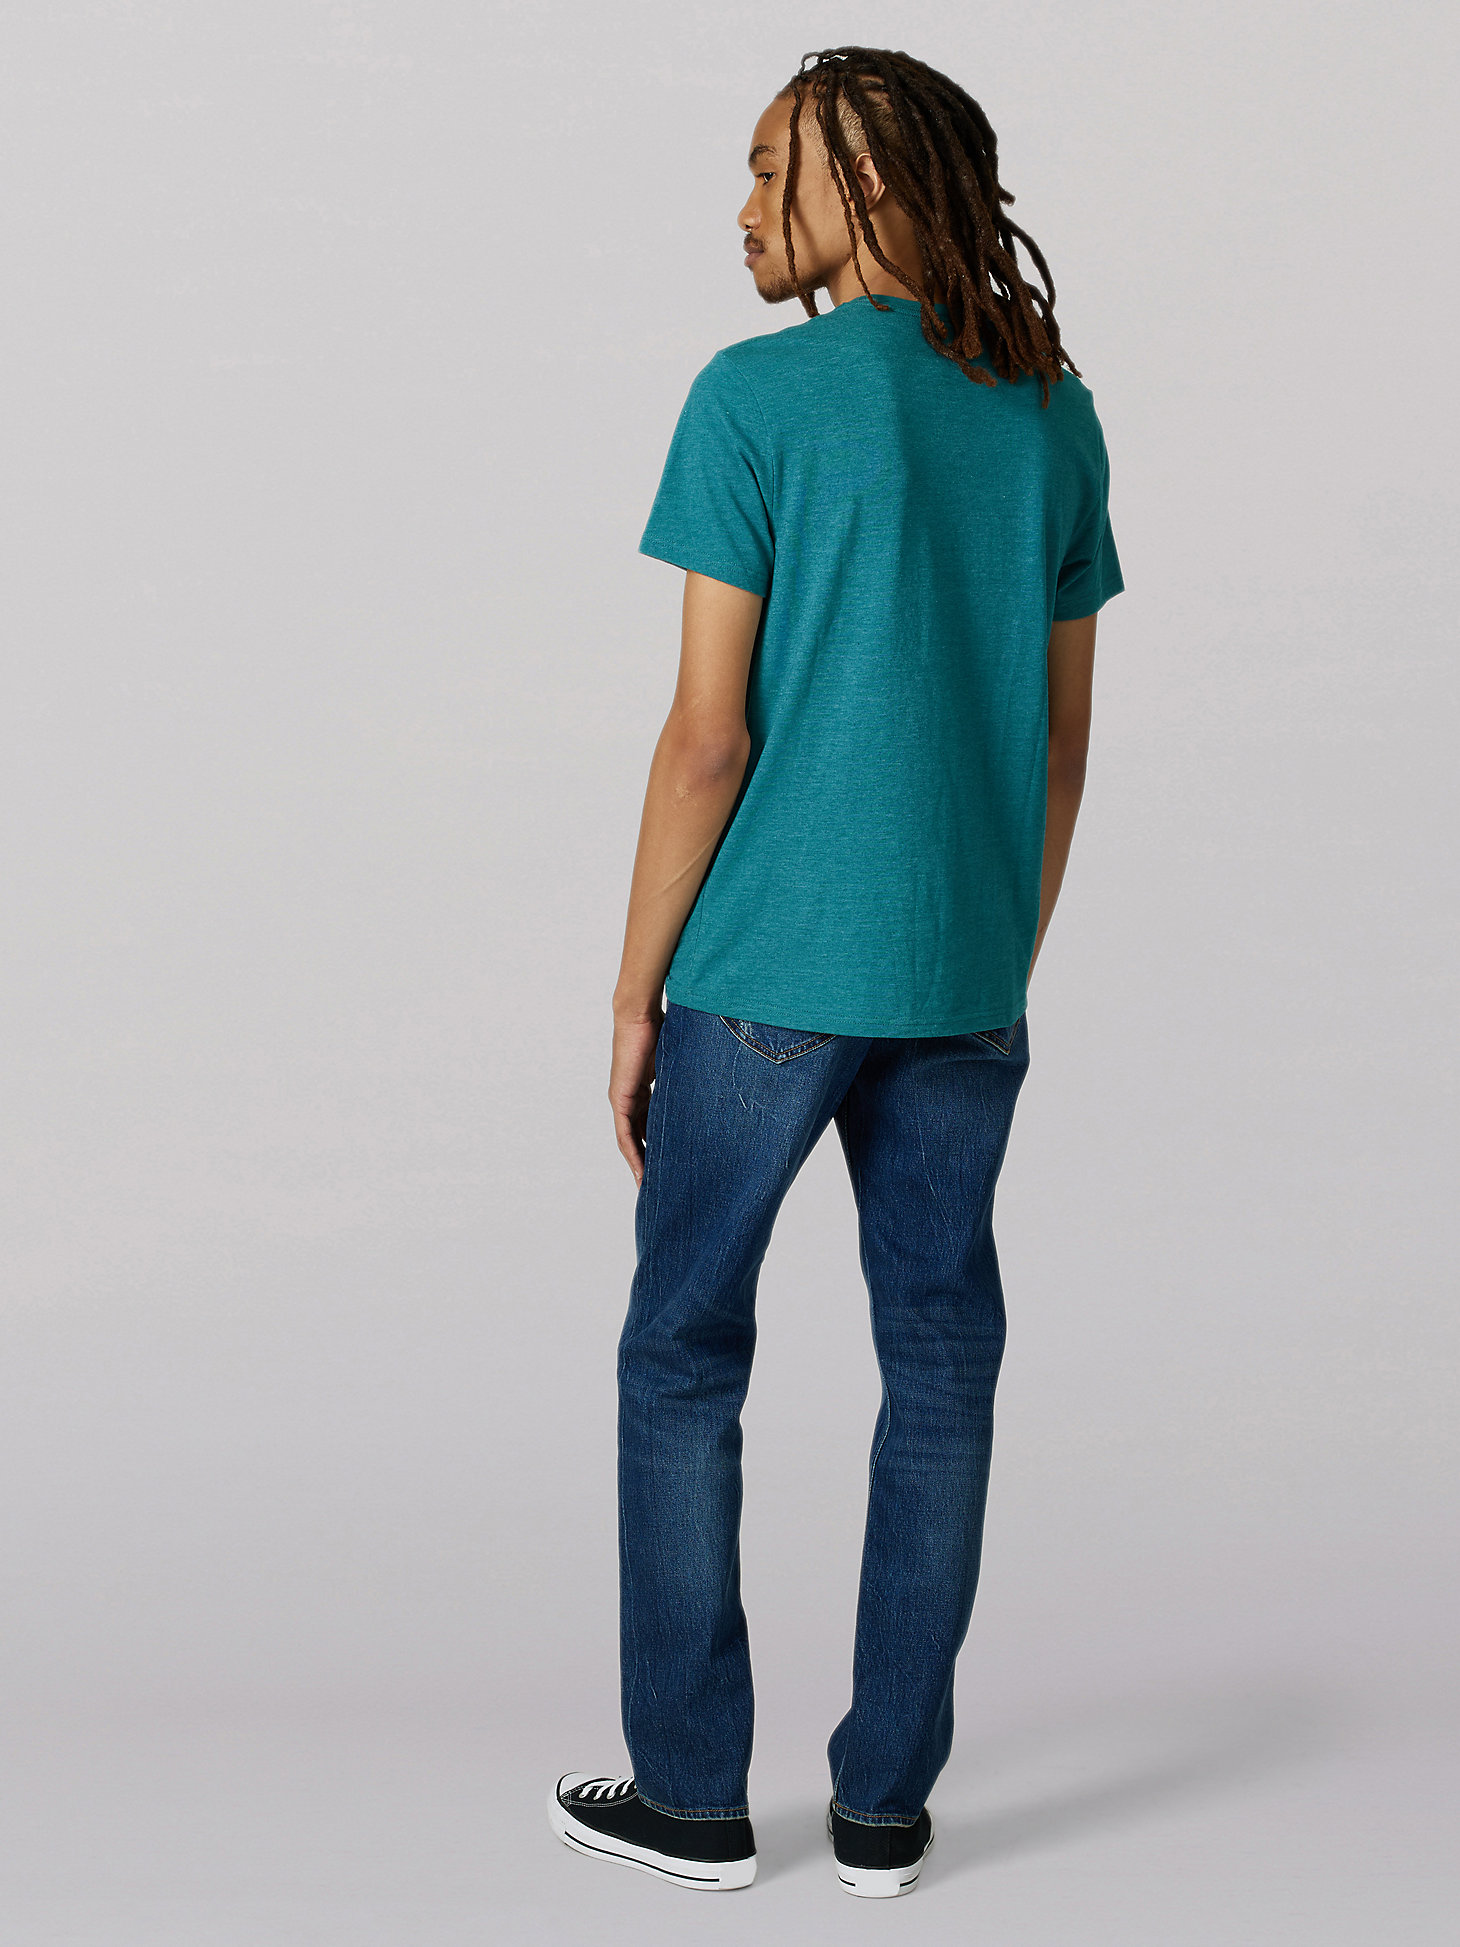 Men's Lee Crafted With Purpose Cut and Sew Tee in Teal Heather alternative view 2